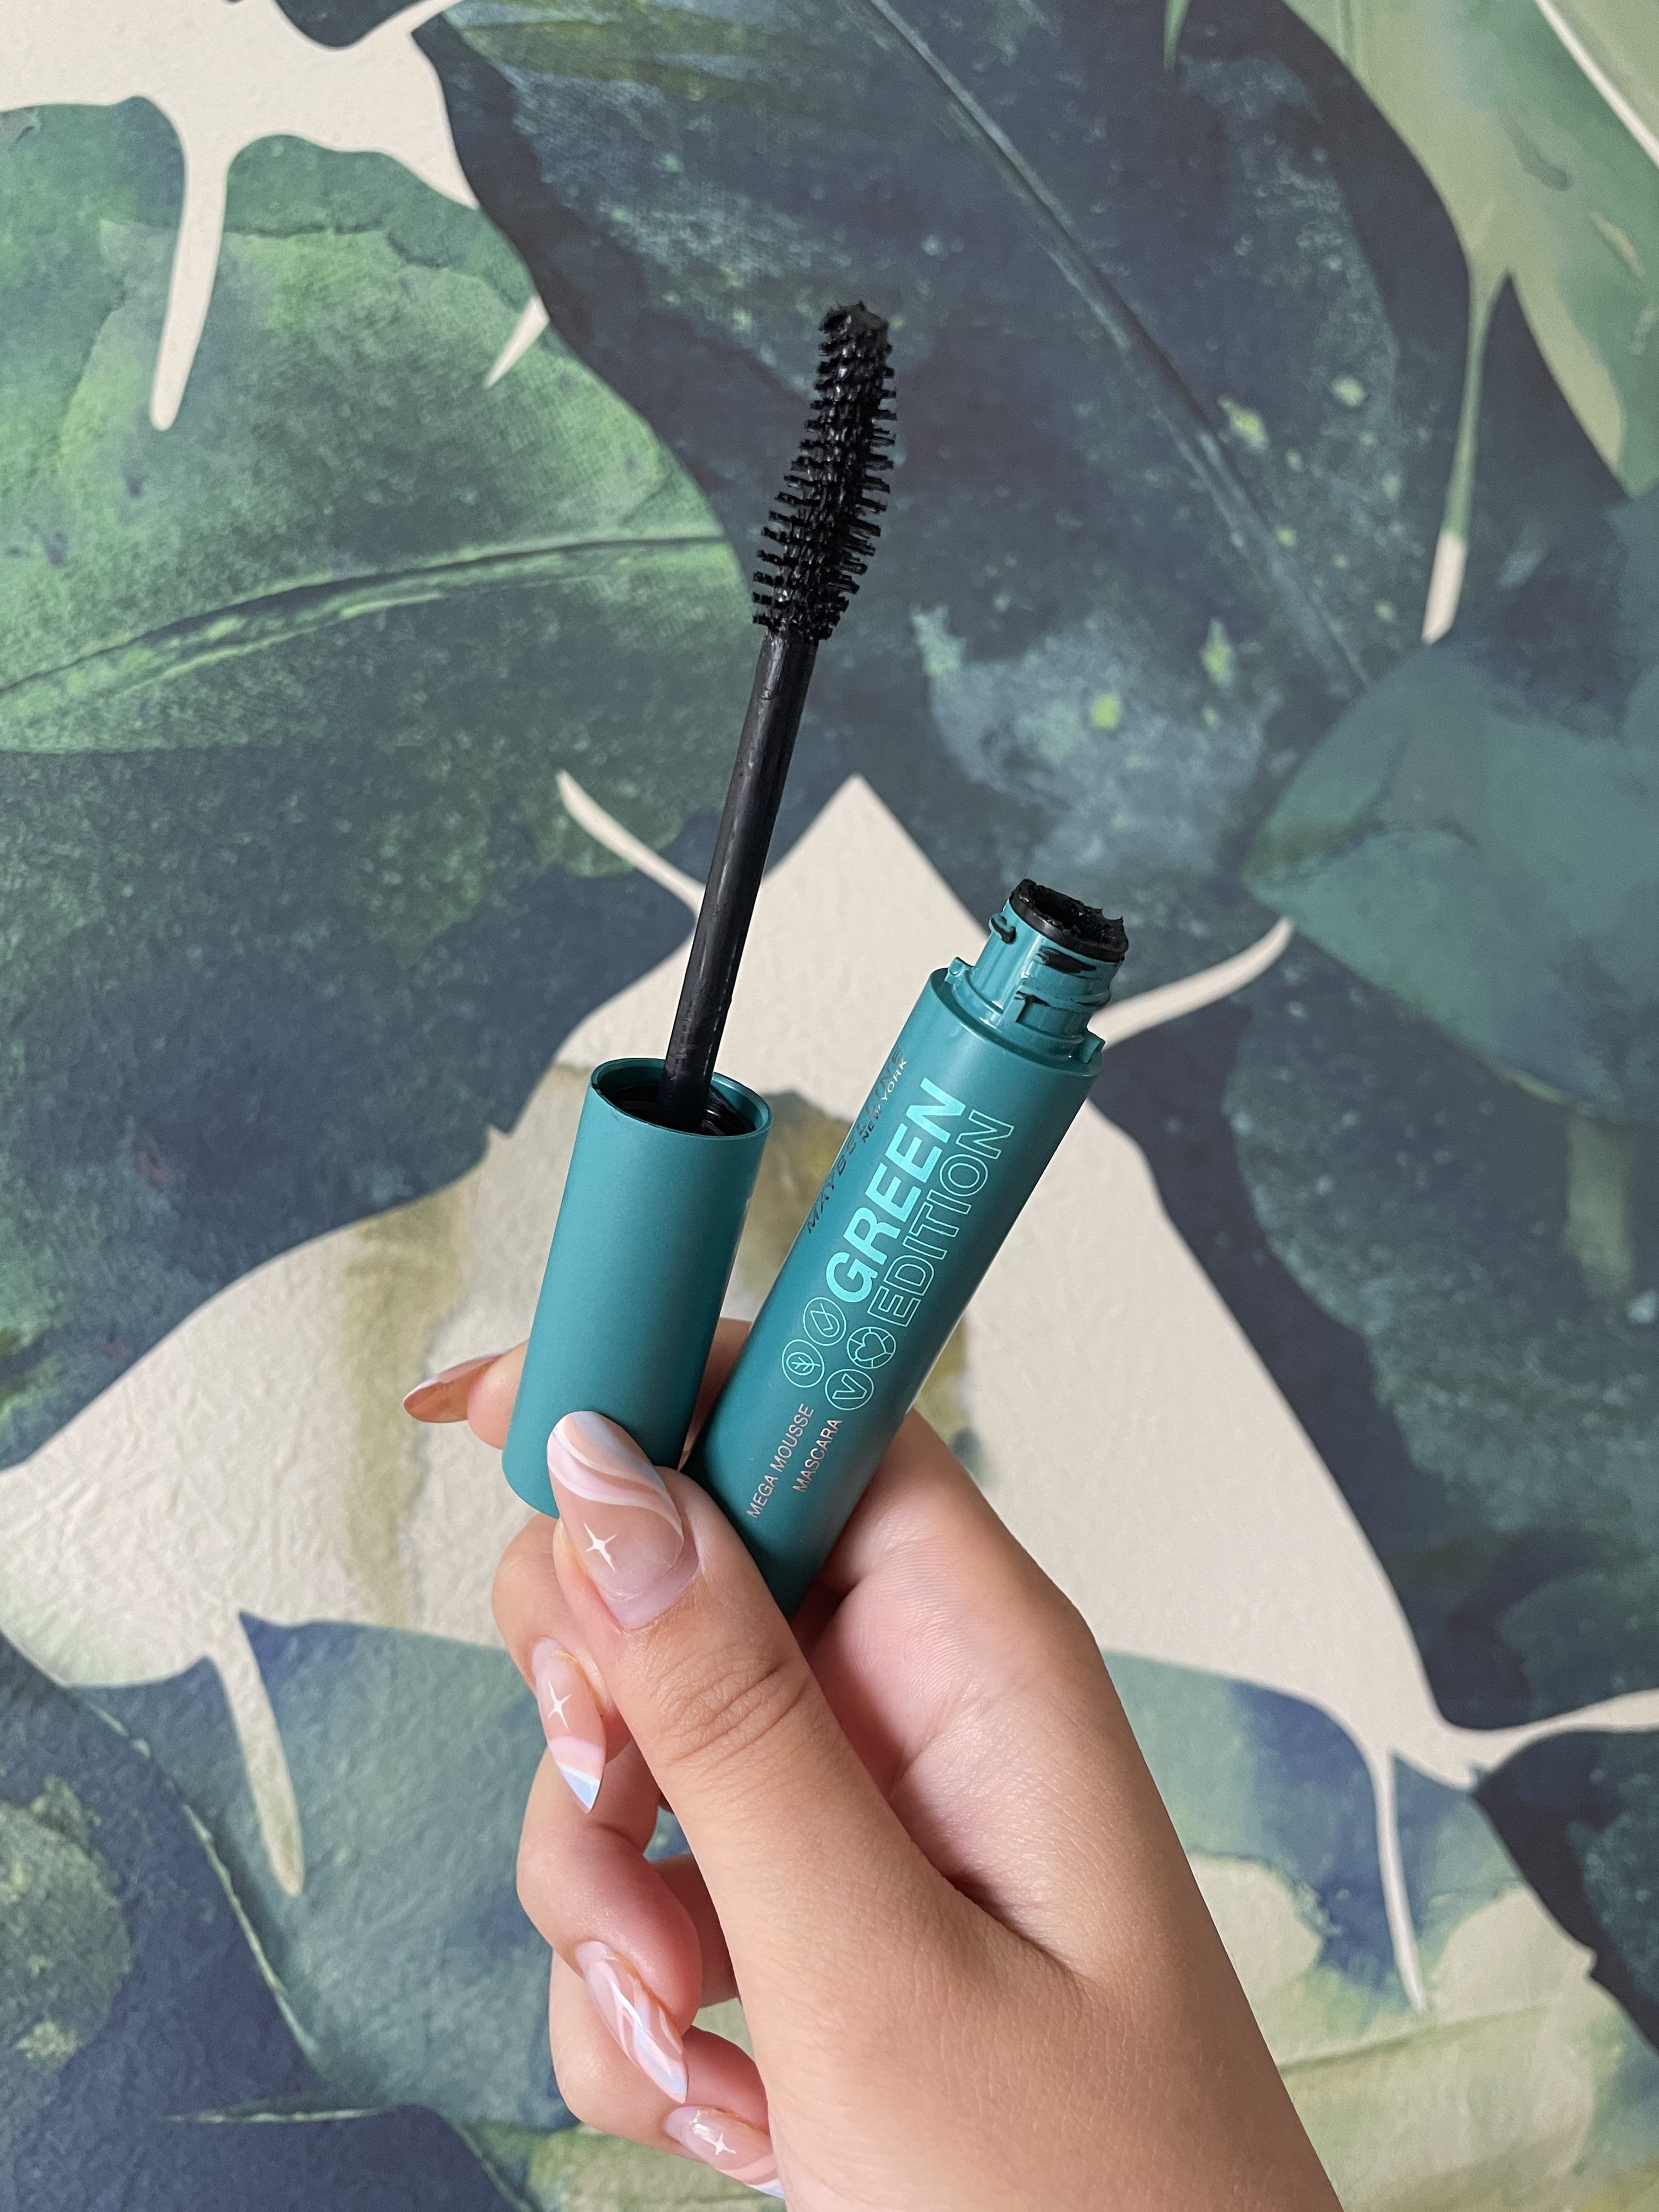 Maybelline Green Edition Beauty POPSUGAR Mousse | Mega Review Photos + Mascara